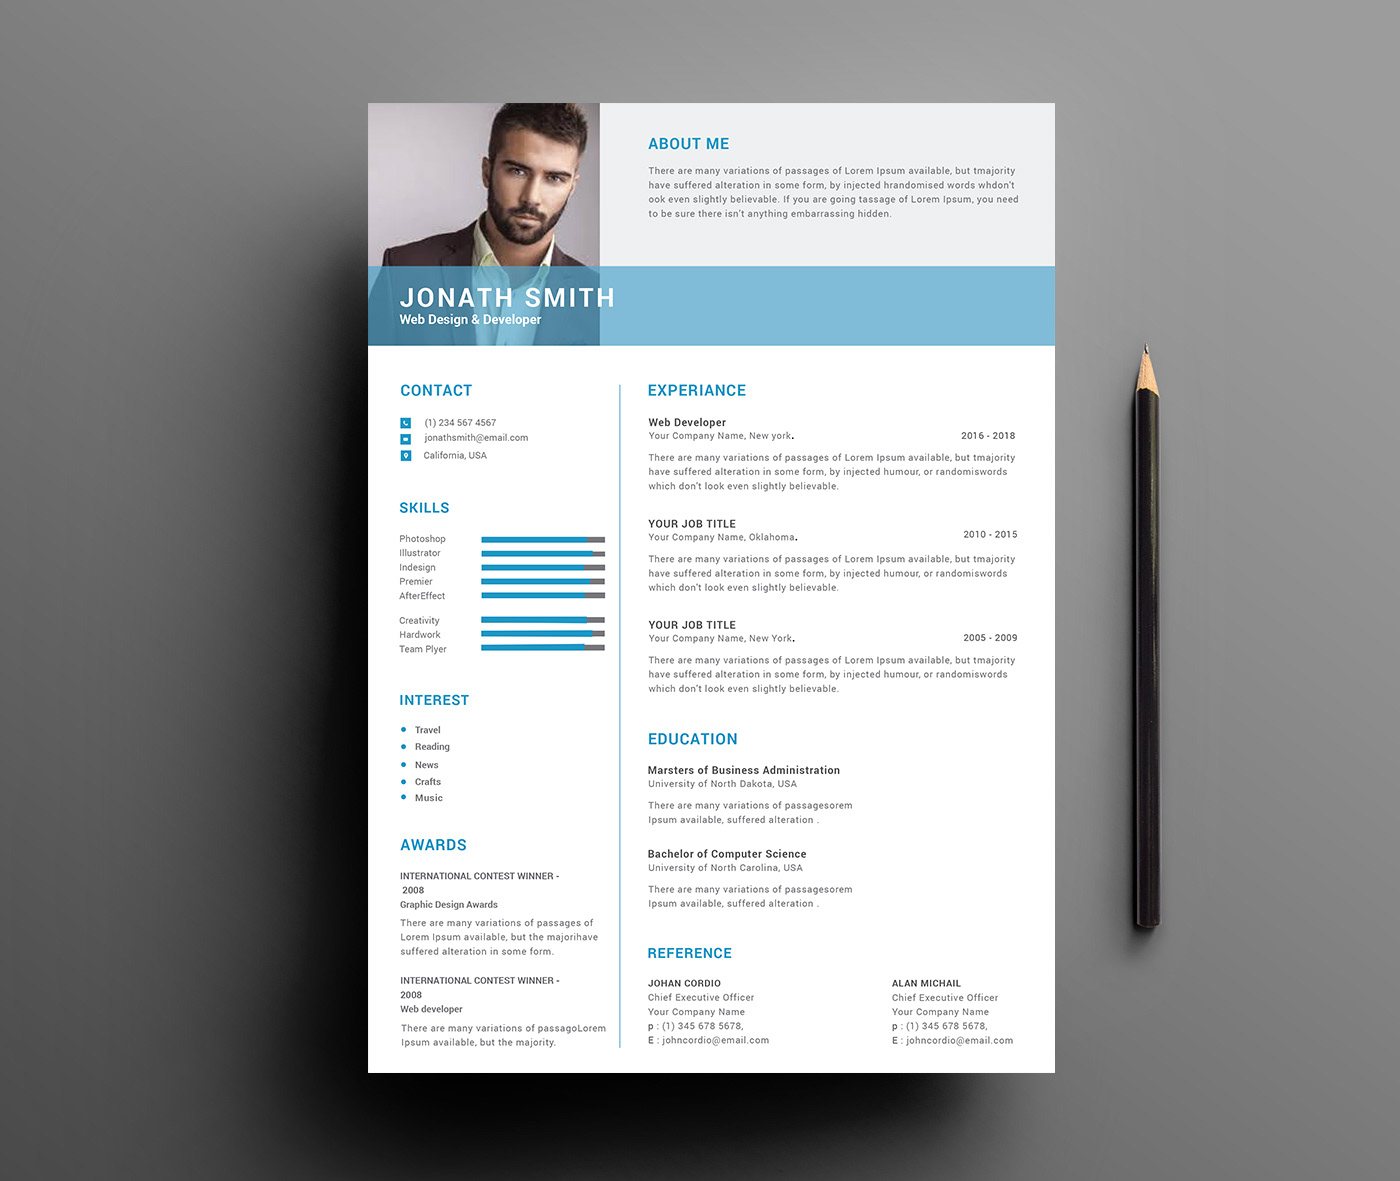 CV Resume resume tamplate MALE RESUME Free Resume a4 size clean resume modern professional cover letter